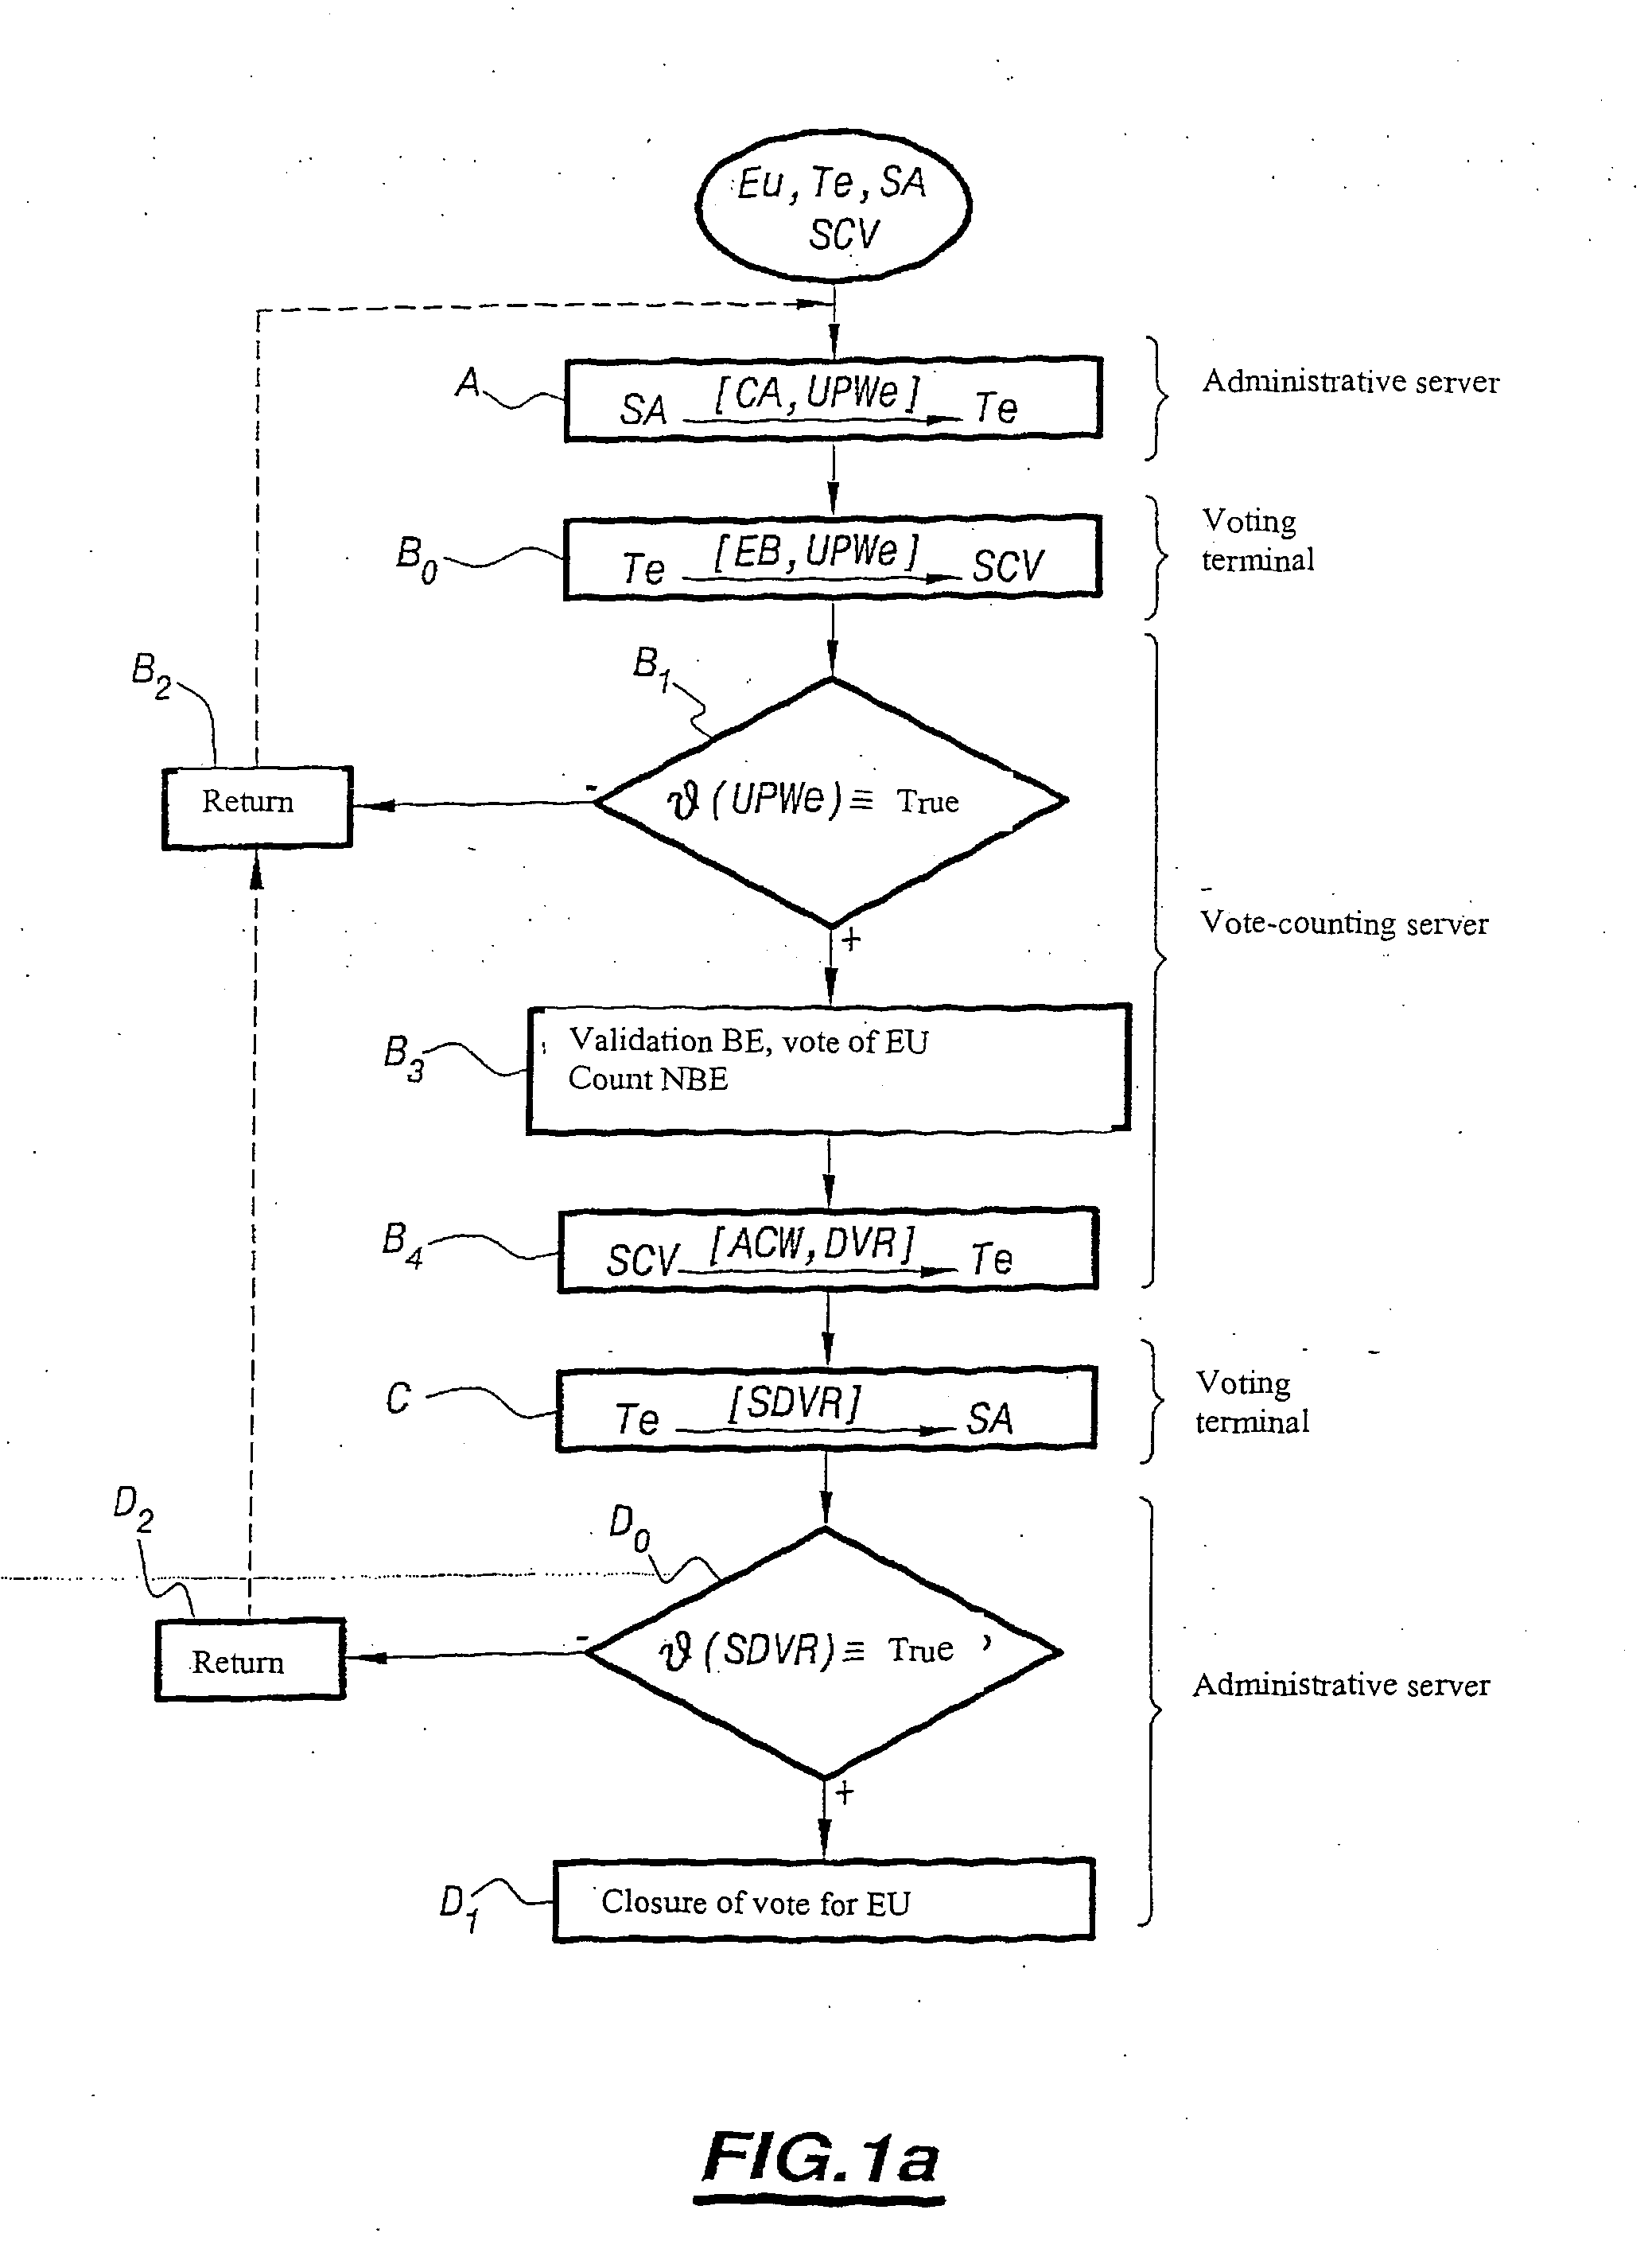 Method and system for electronic voting over a high-security network